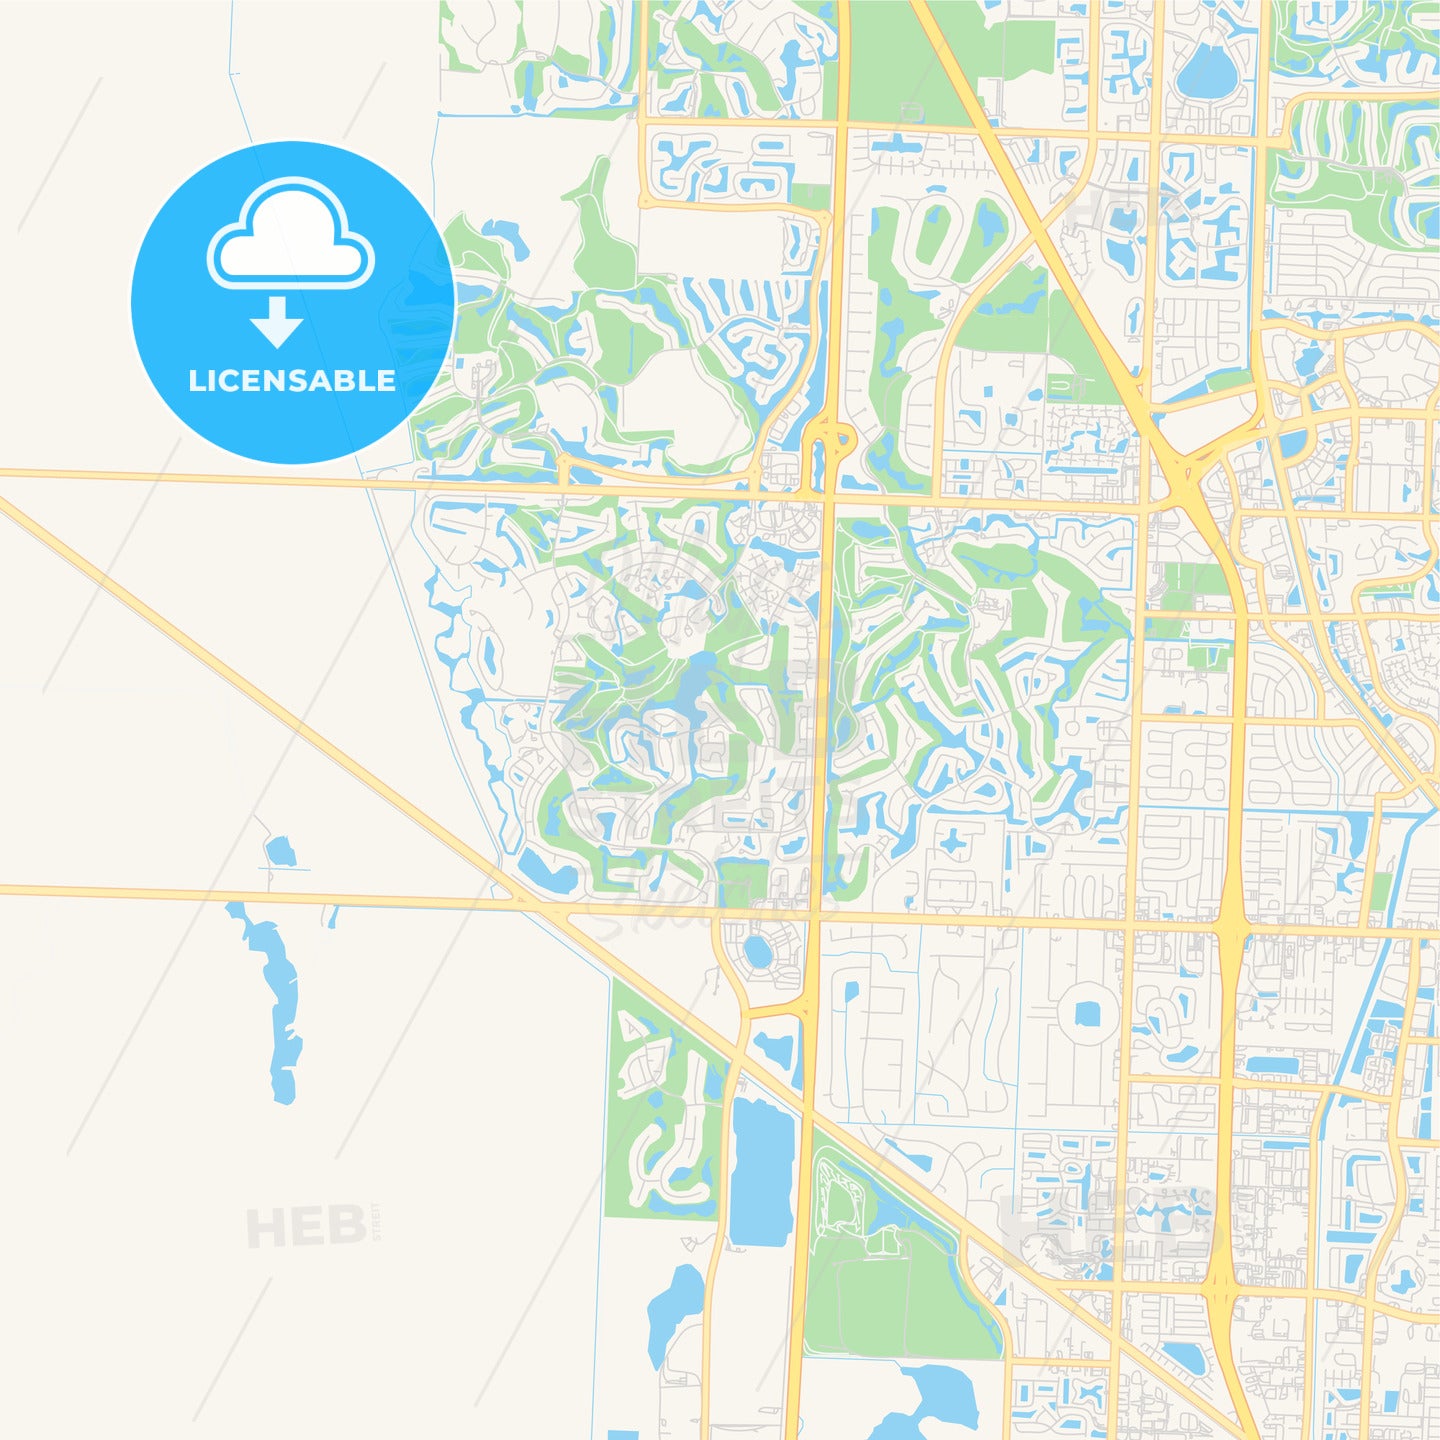 Empty vector map of Palm Beach Gardens, Florida, United States of America